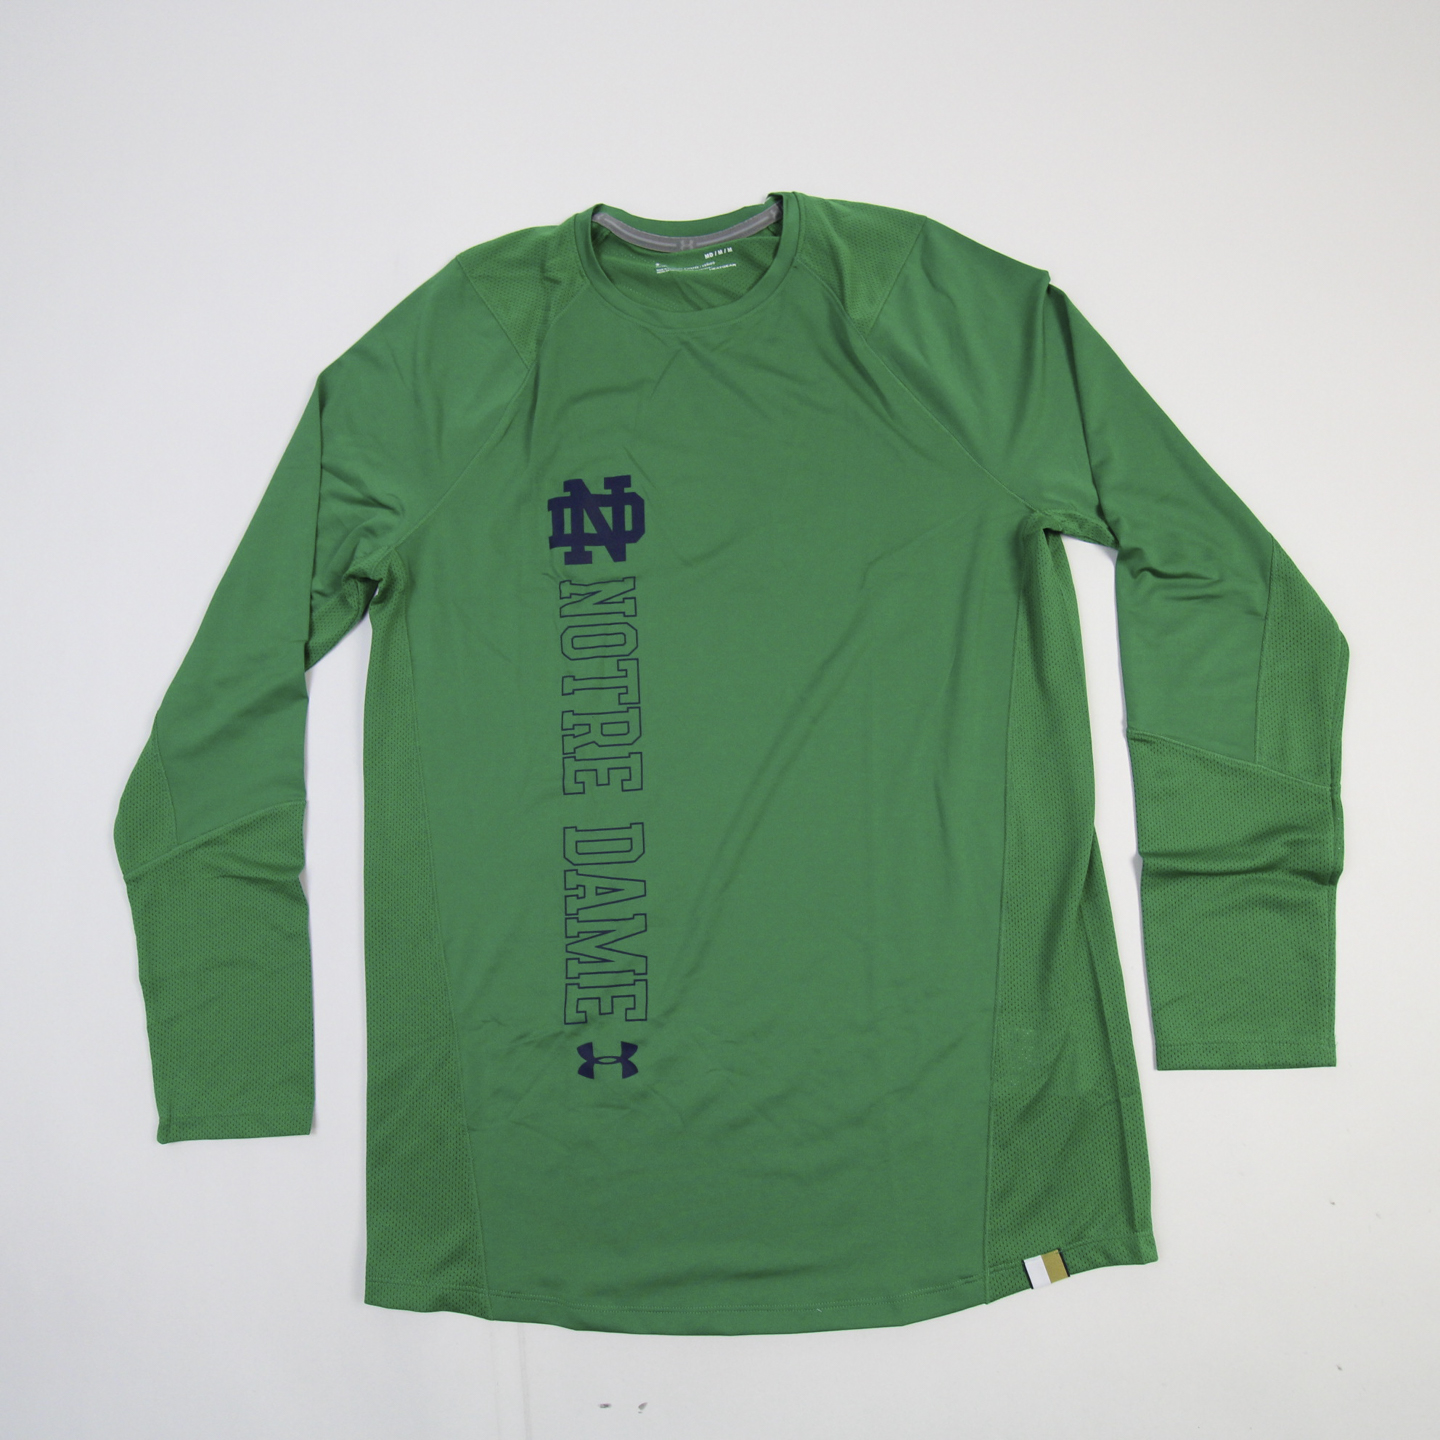 Details about   Under Armour Notre Dame Player Issue Sideline Training shirt men Fighting Irish 